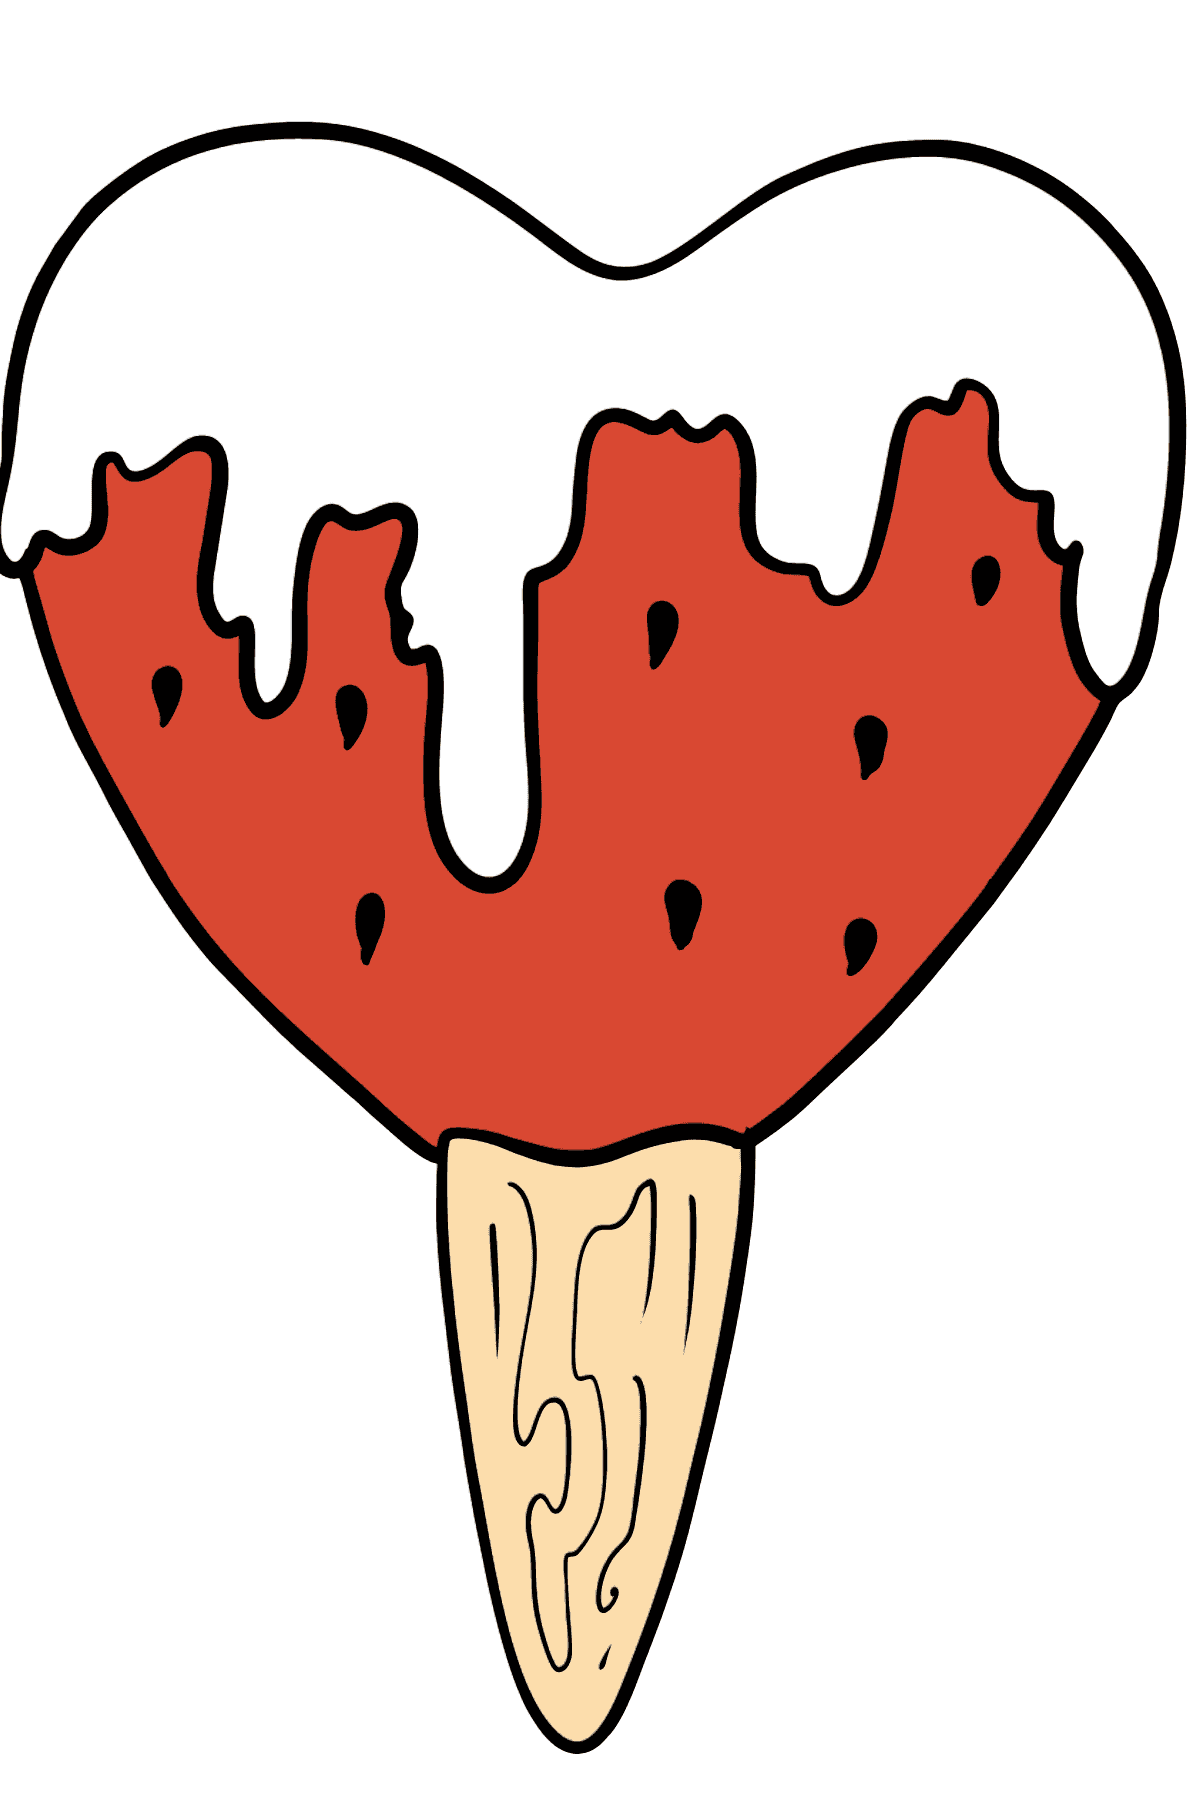 Heart Shaped Popsicle coloring page - Coloring Pages for Kids